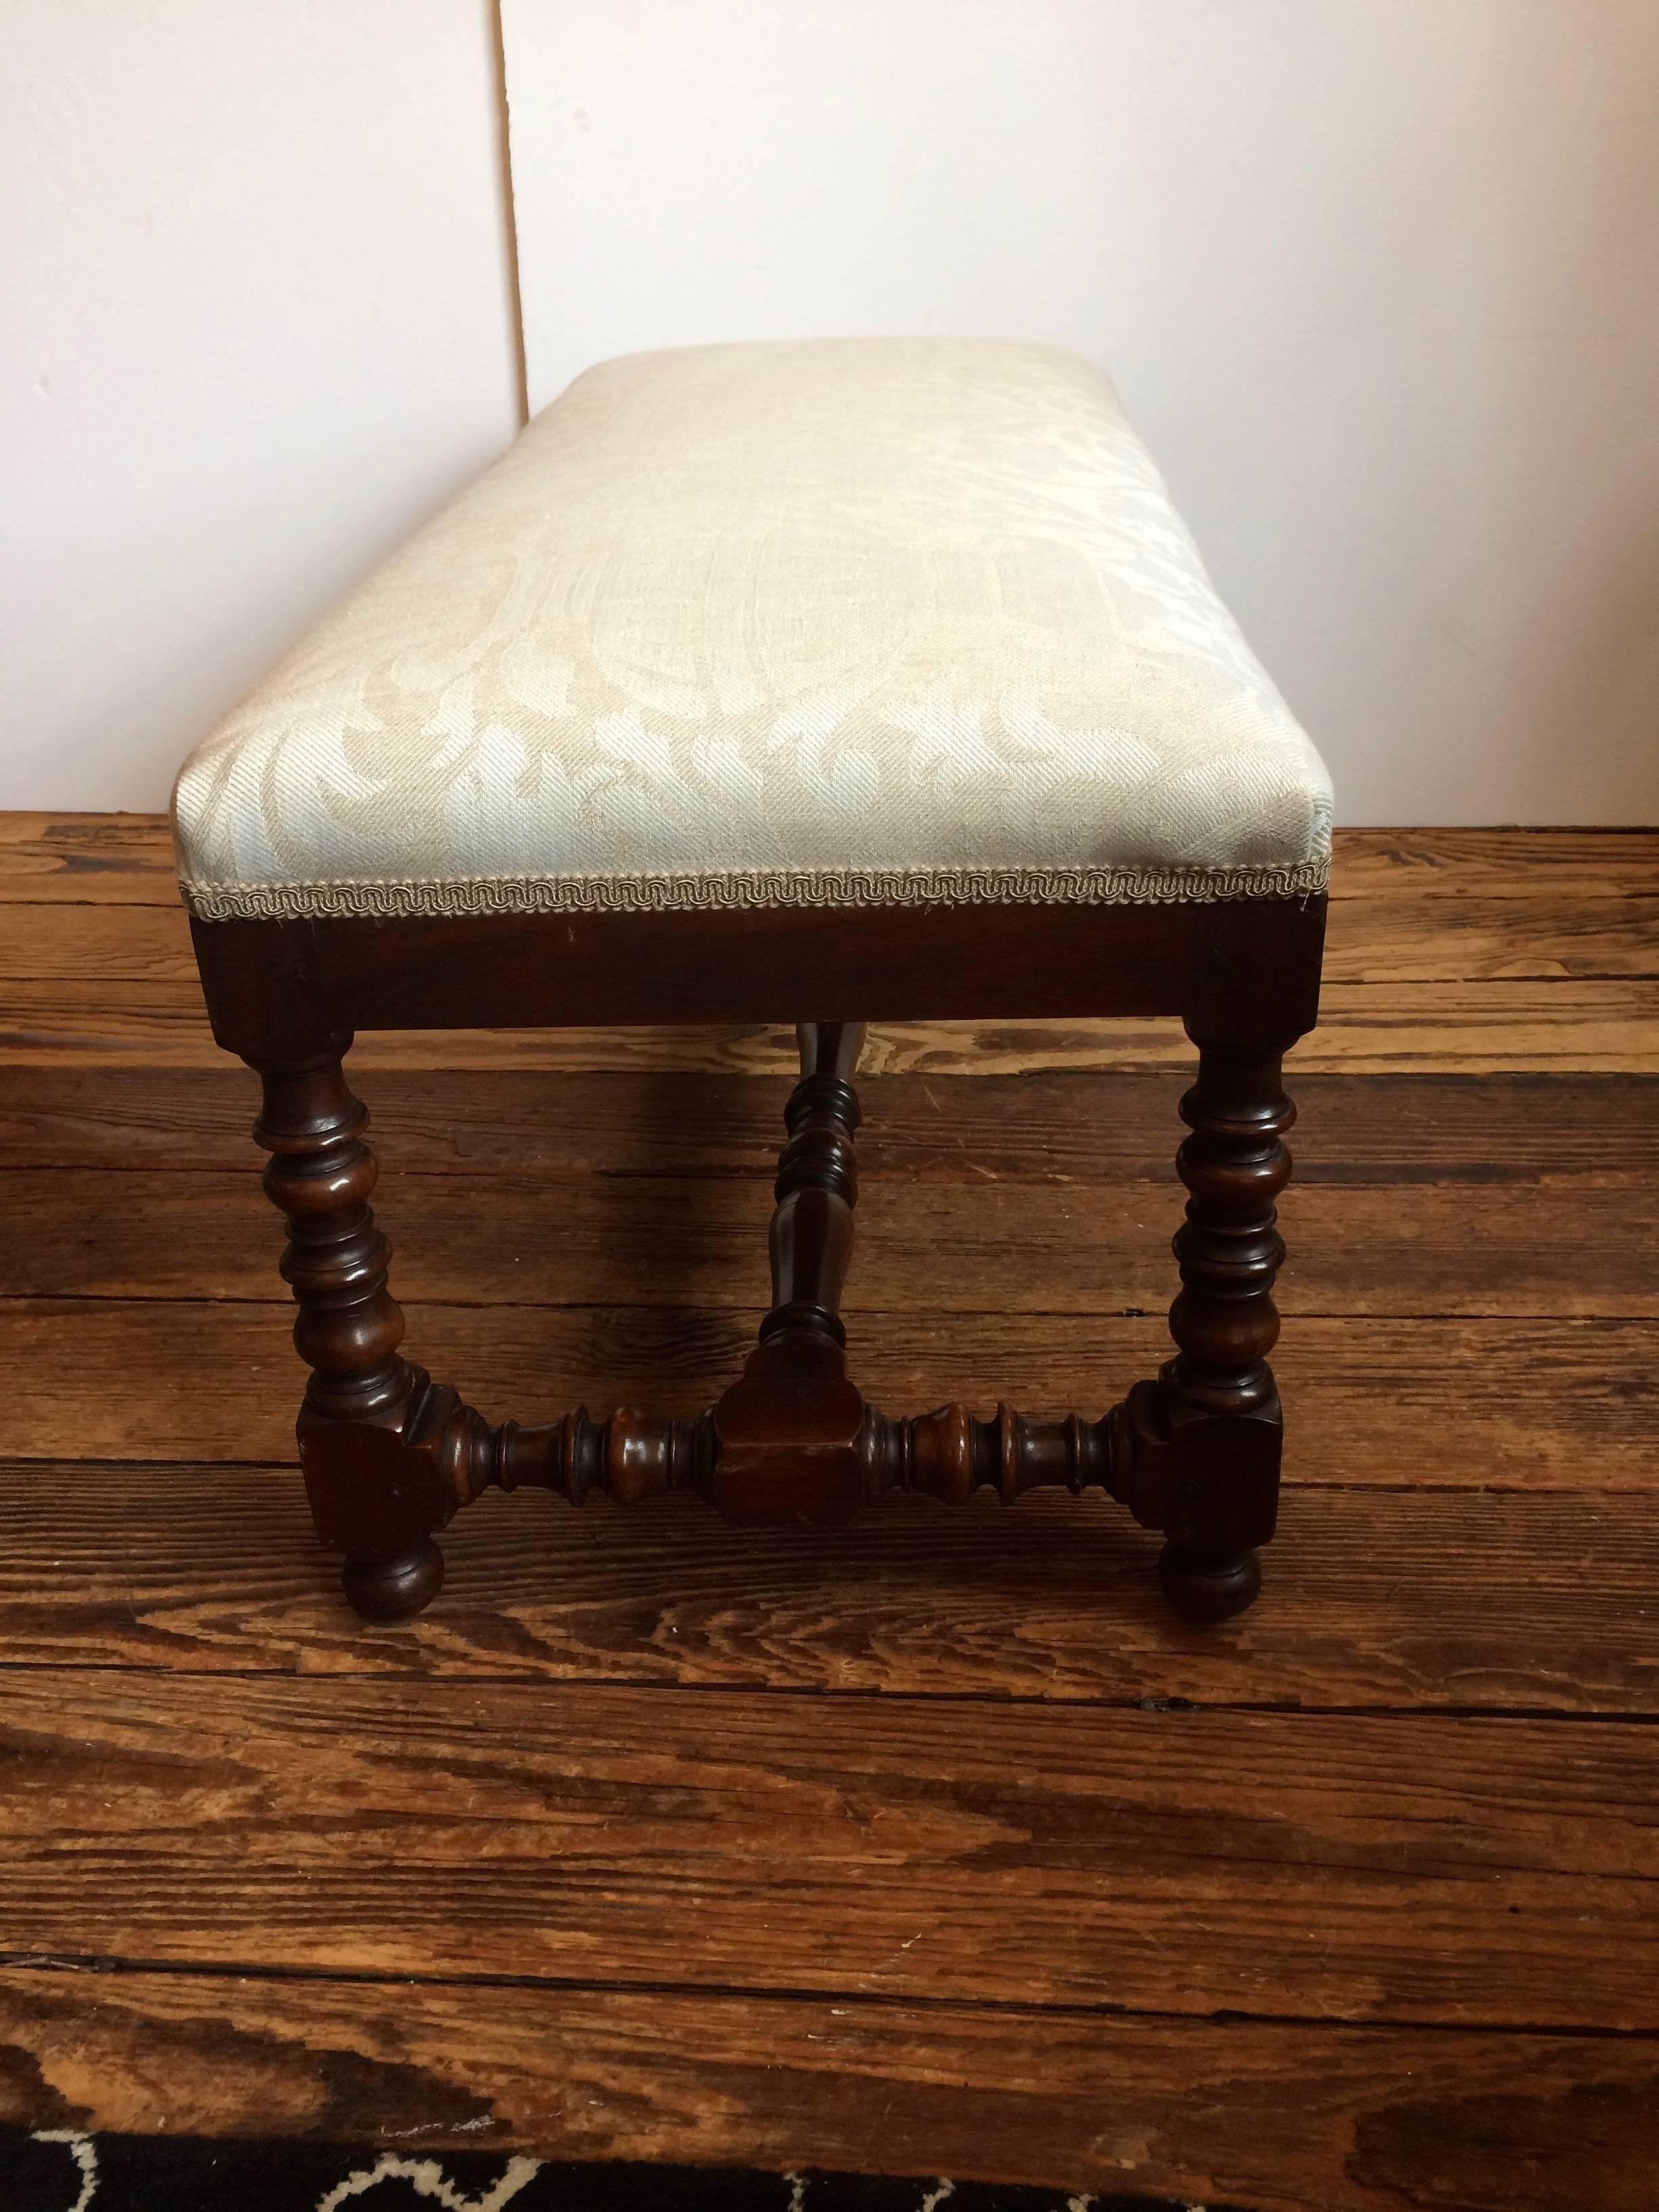 Classic traditional bench having mahogany barley twist legs and stretcher, newly upholstered in a neutral fortuny style pattern fabric.